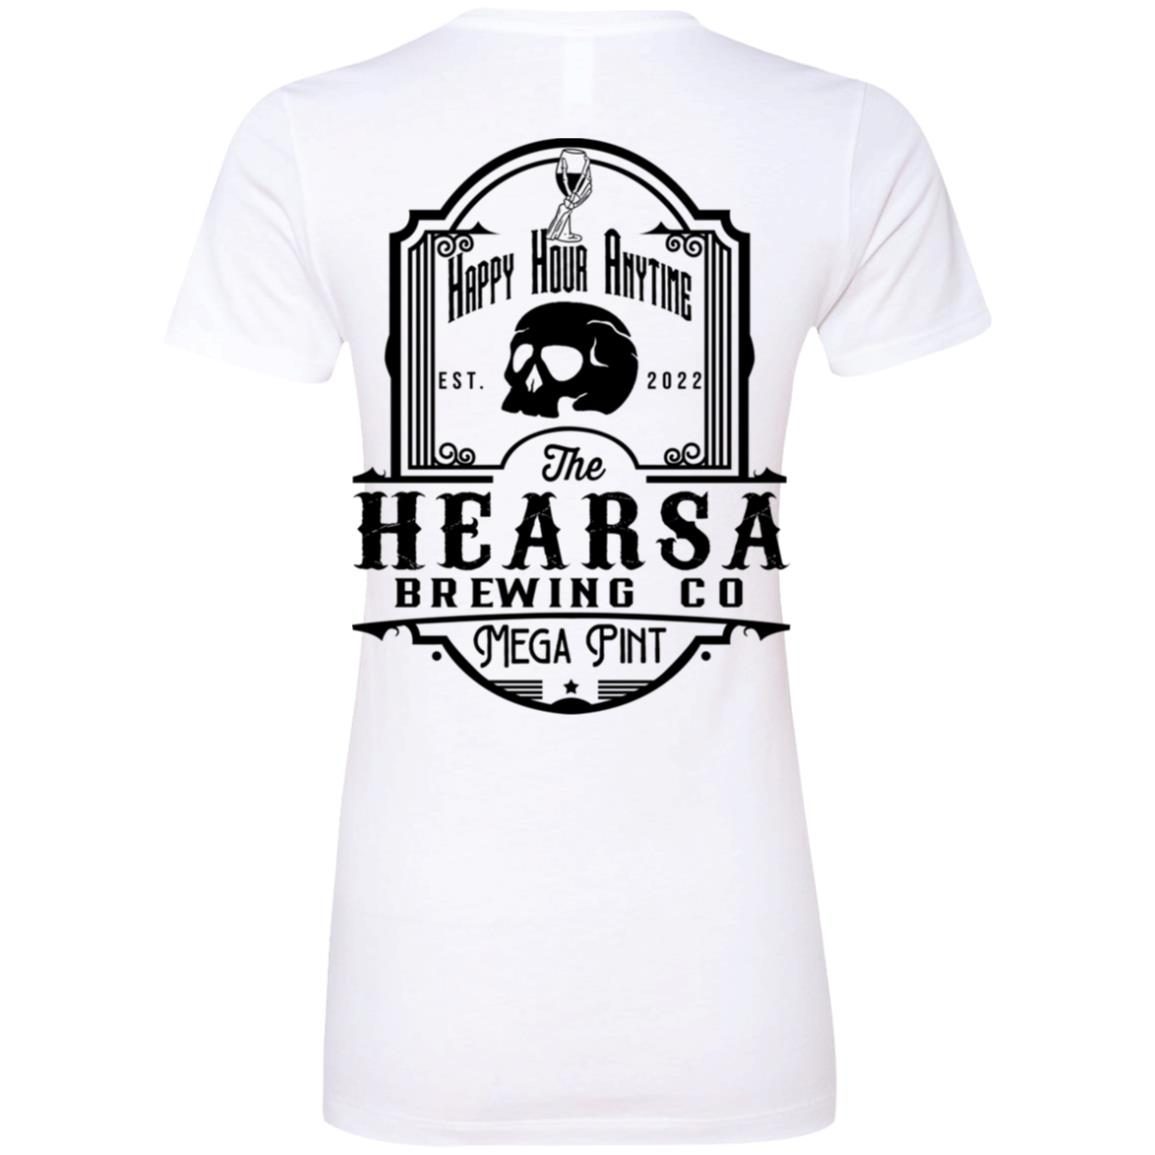 Isn’t Happy Hour Anytime That’s Hearsay Brewing Co Mega Pint shirt